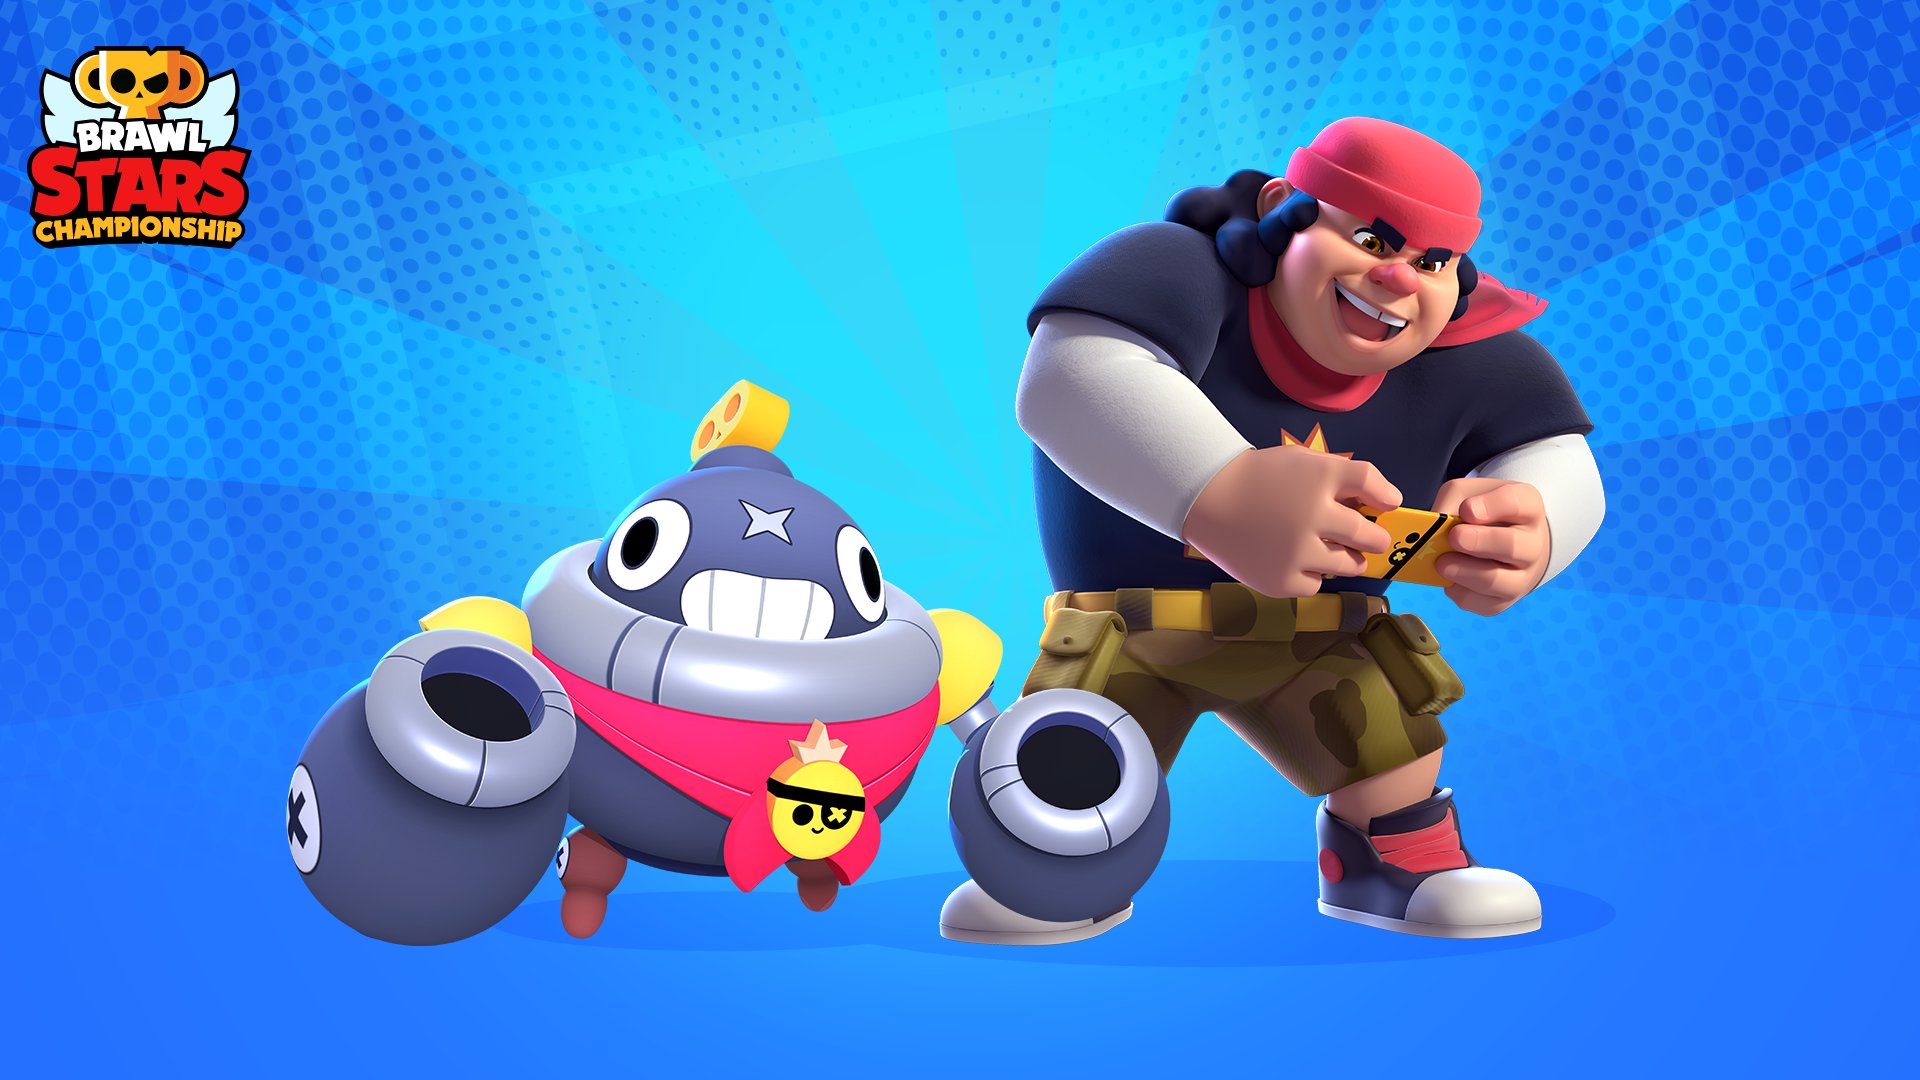 Brawl Stars On Twitter This Saturday The Brawl Stars Championship Challenge Is Back Attention To The New Rules The Challenge Will Be Available For 48 Hours You - supercell brawl stars tournament